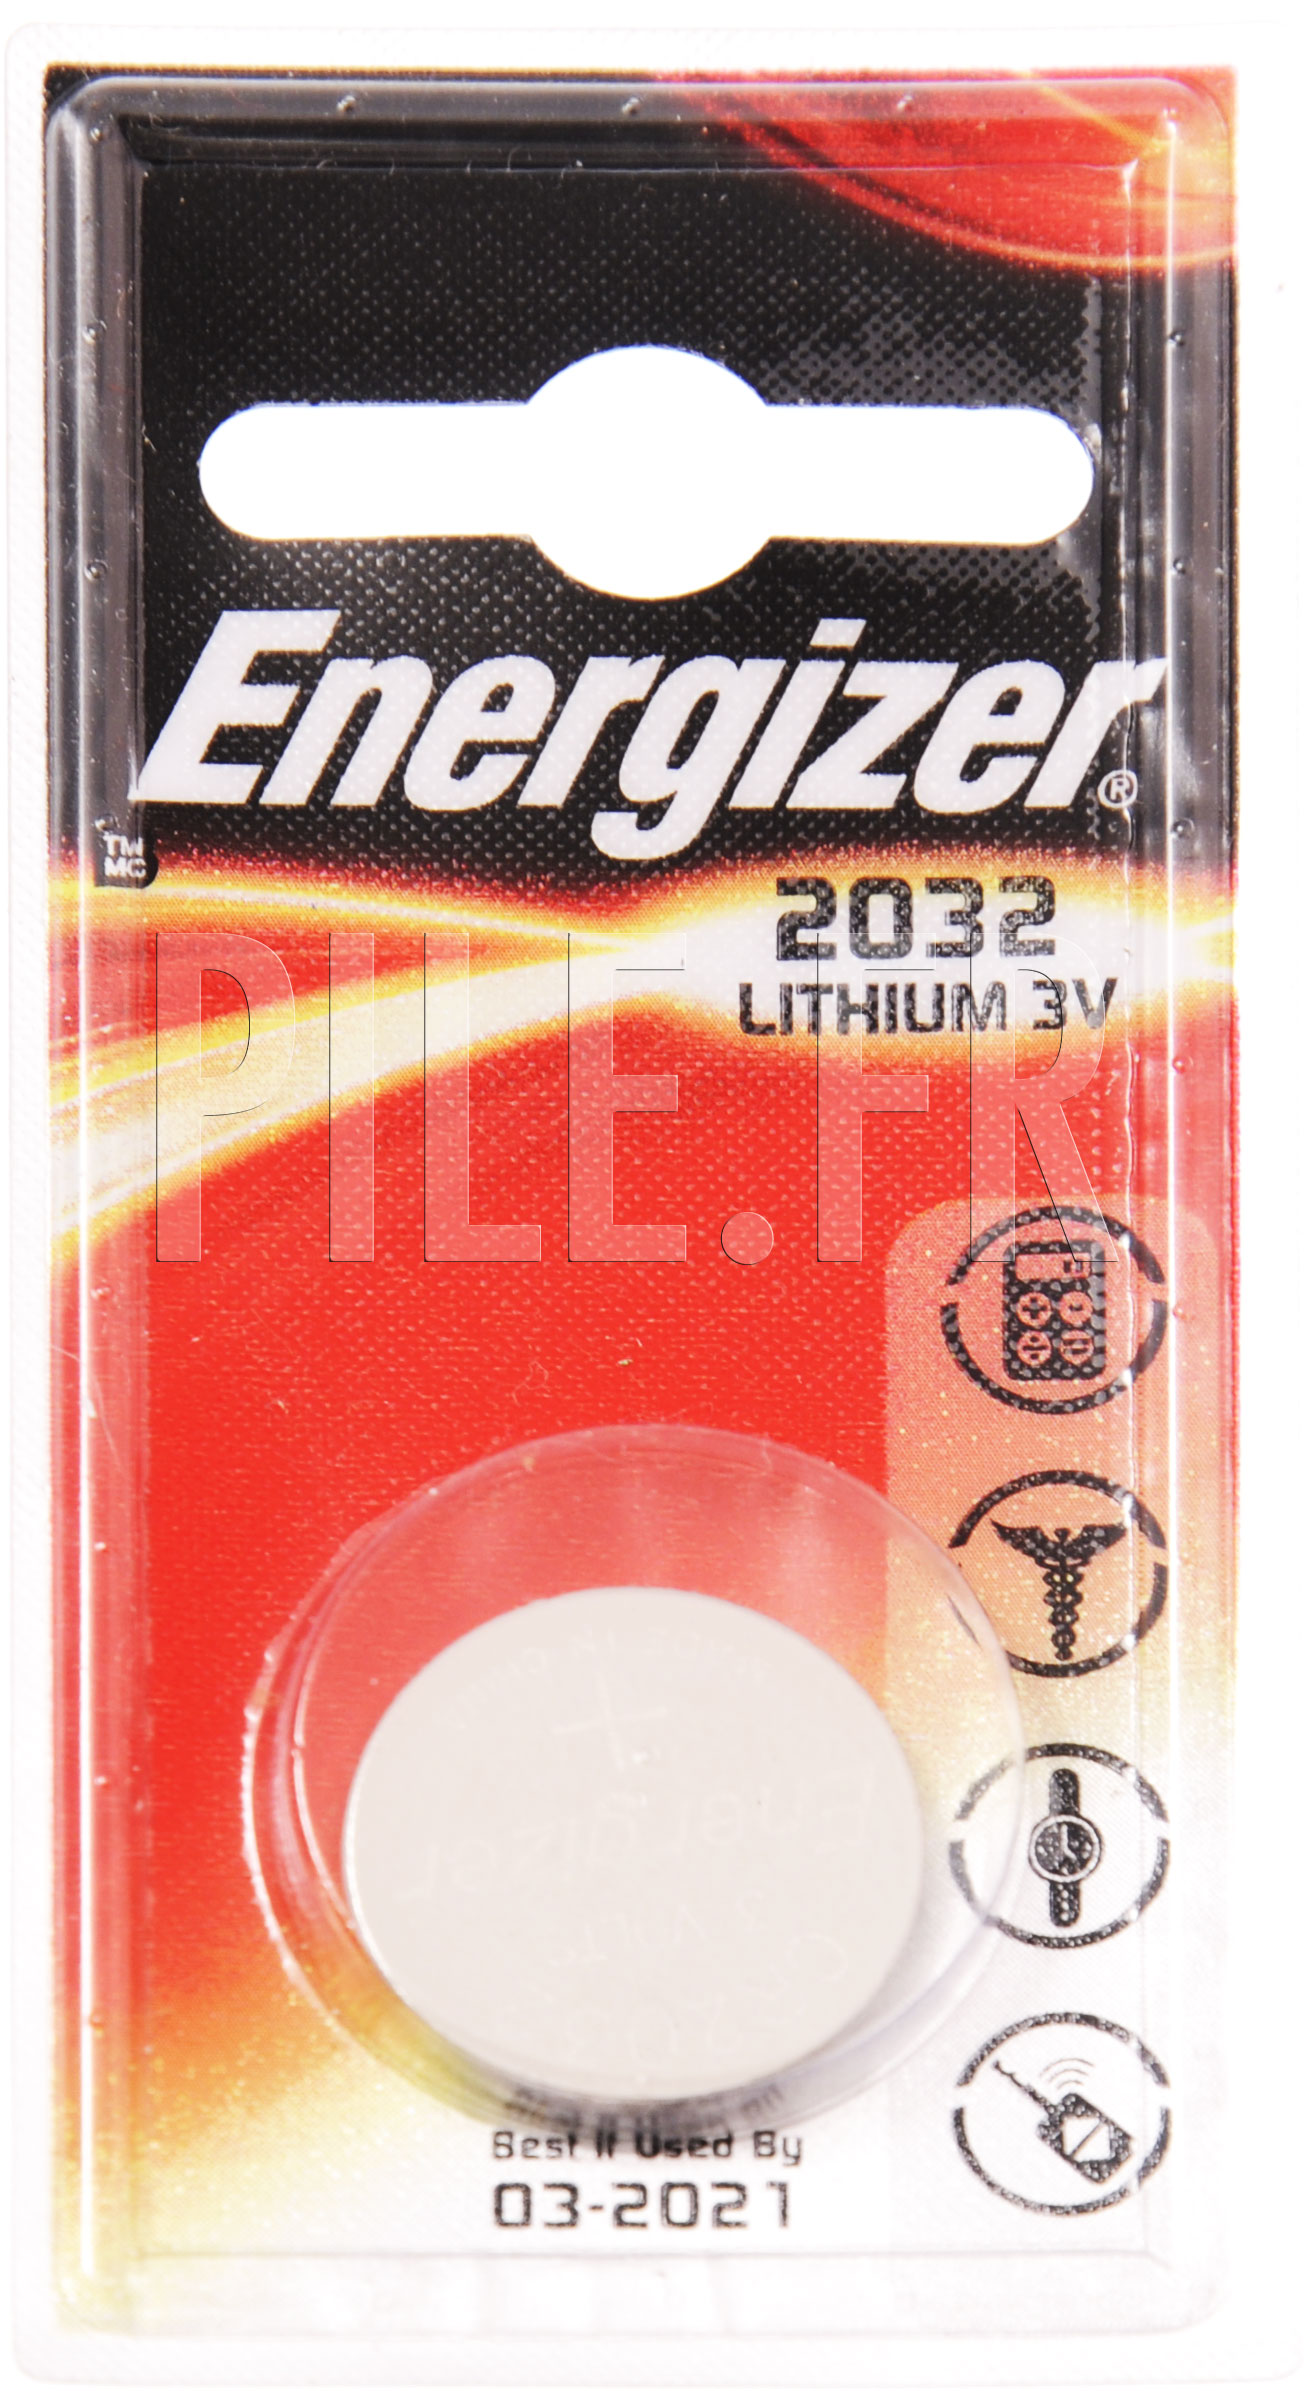 Piles bouton CR2032 Energizer Ultimate